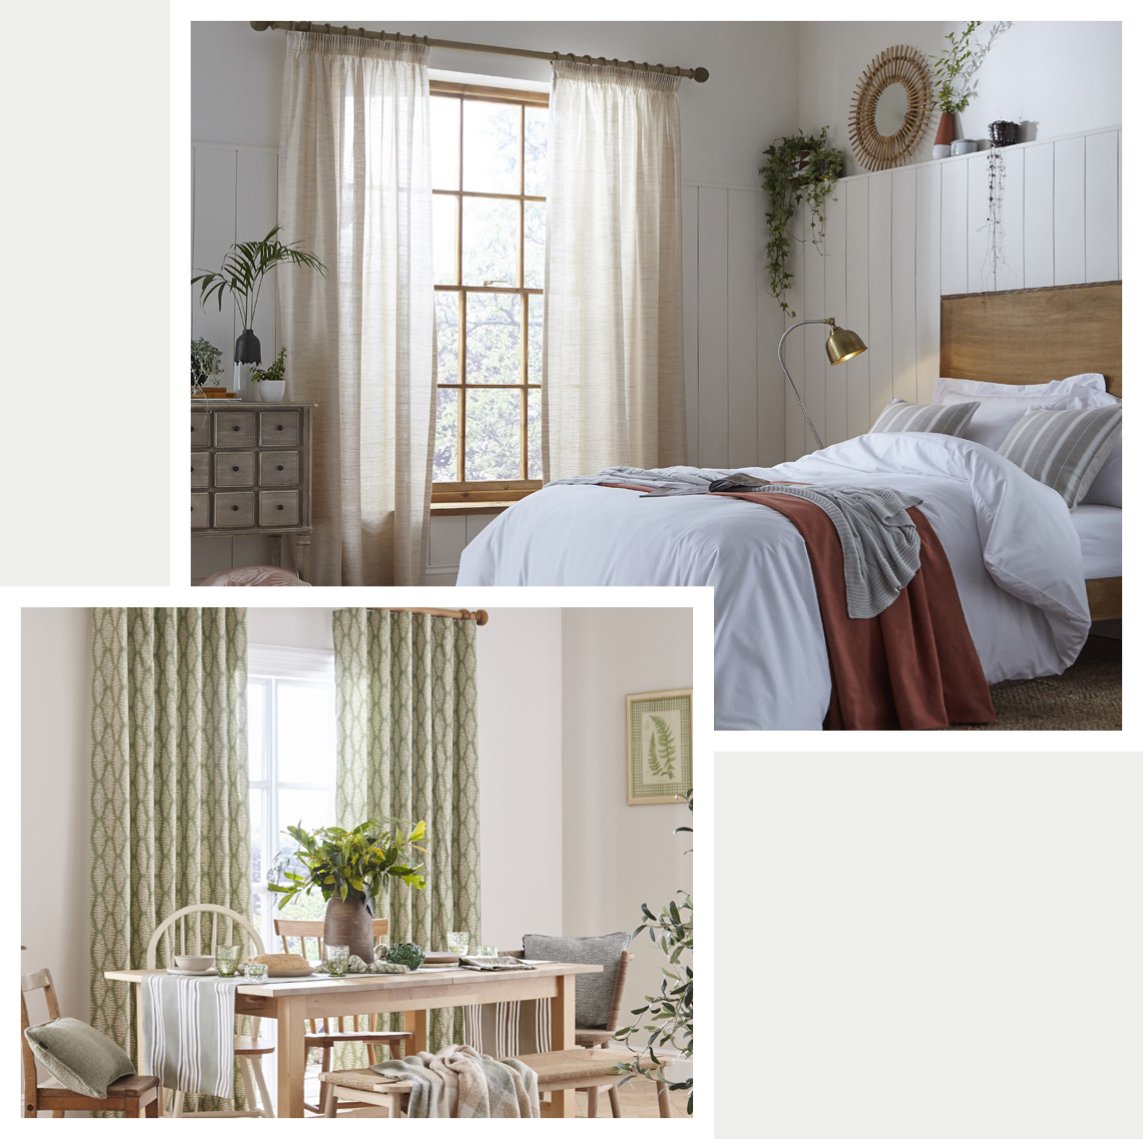 Examples of fabrics supplied by SilverBirch Curtains